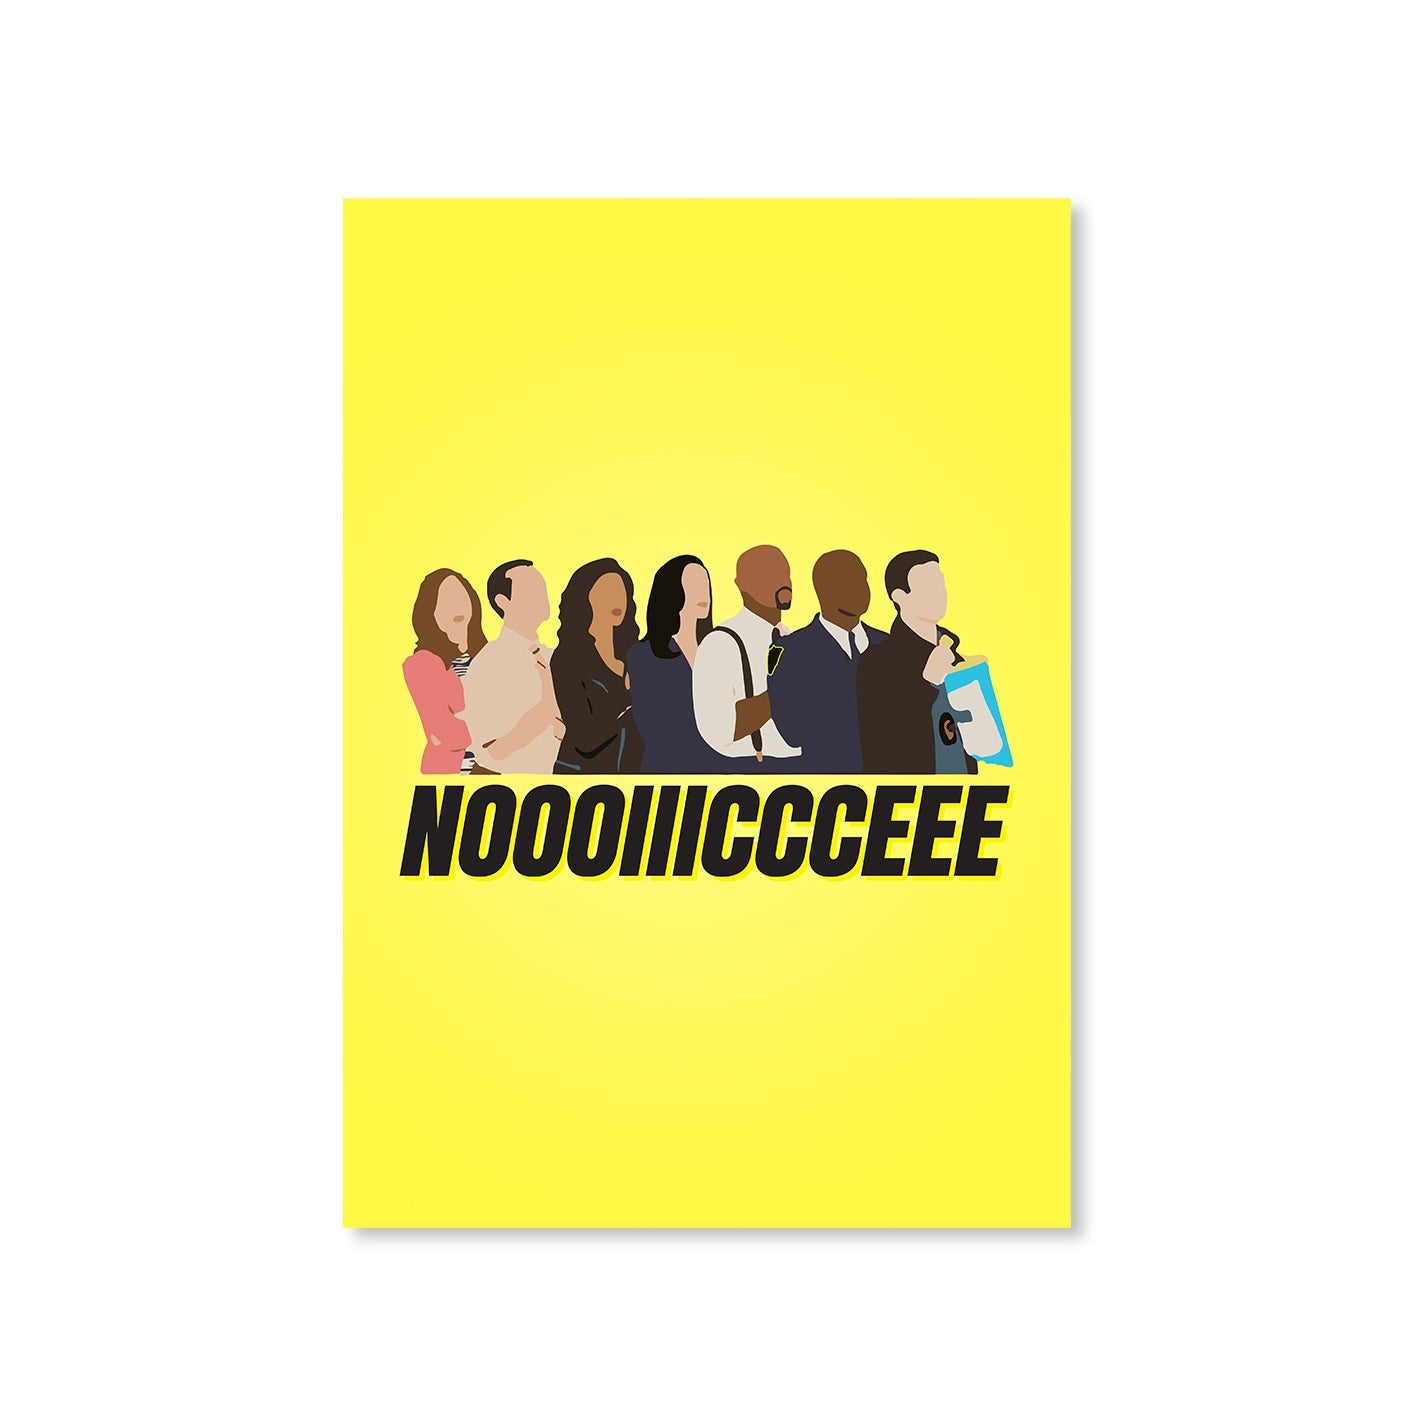 brooklyn nine-nine noooiiiccceee poster wall art buy online india the banyan tee tbt a4 detective jake peralta terry charles boyle gina linetti andy samberg merchandise clothing acceessories